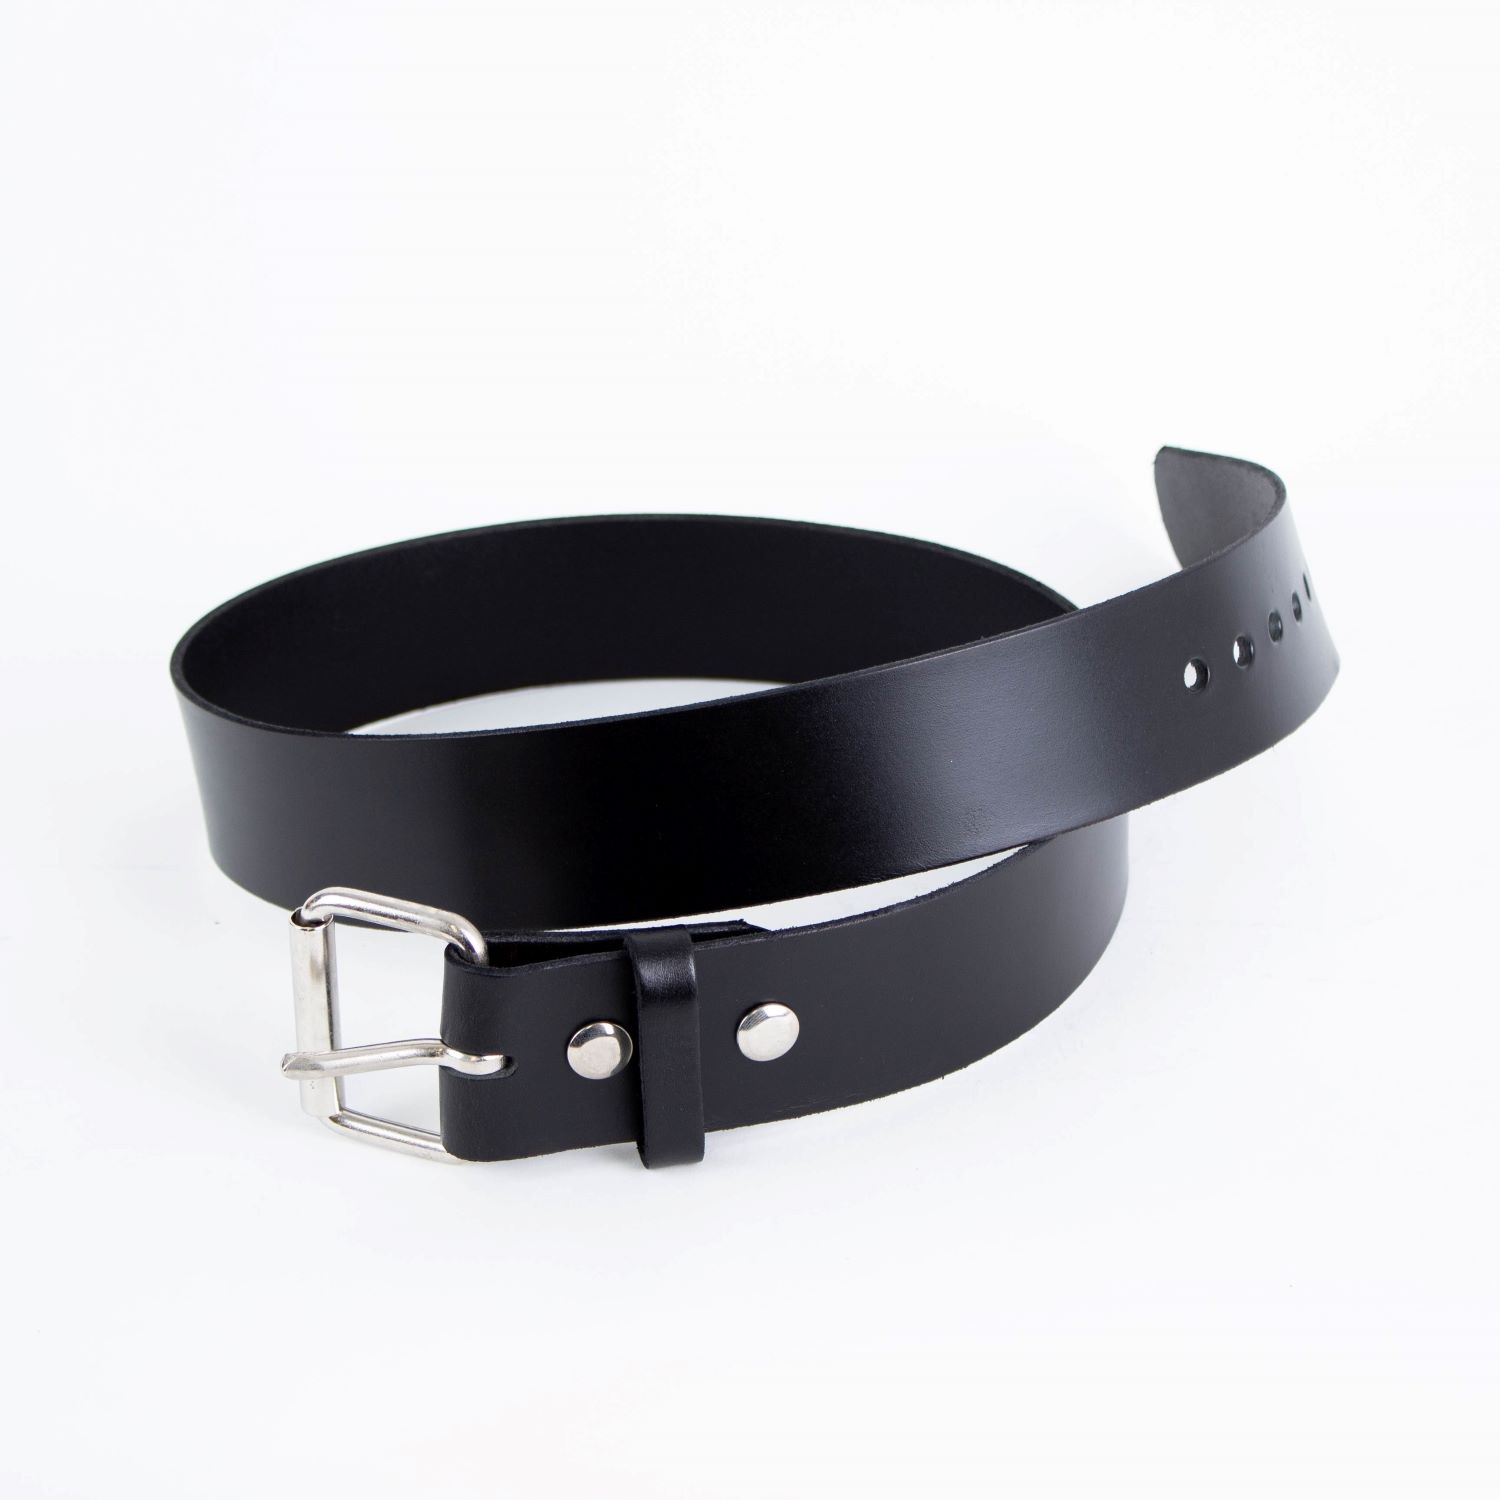 Amish-Made Casual/Work Leather Belts - 2 inch wide, Clothing and ...